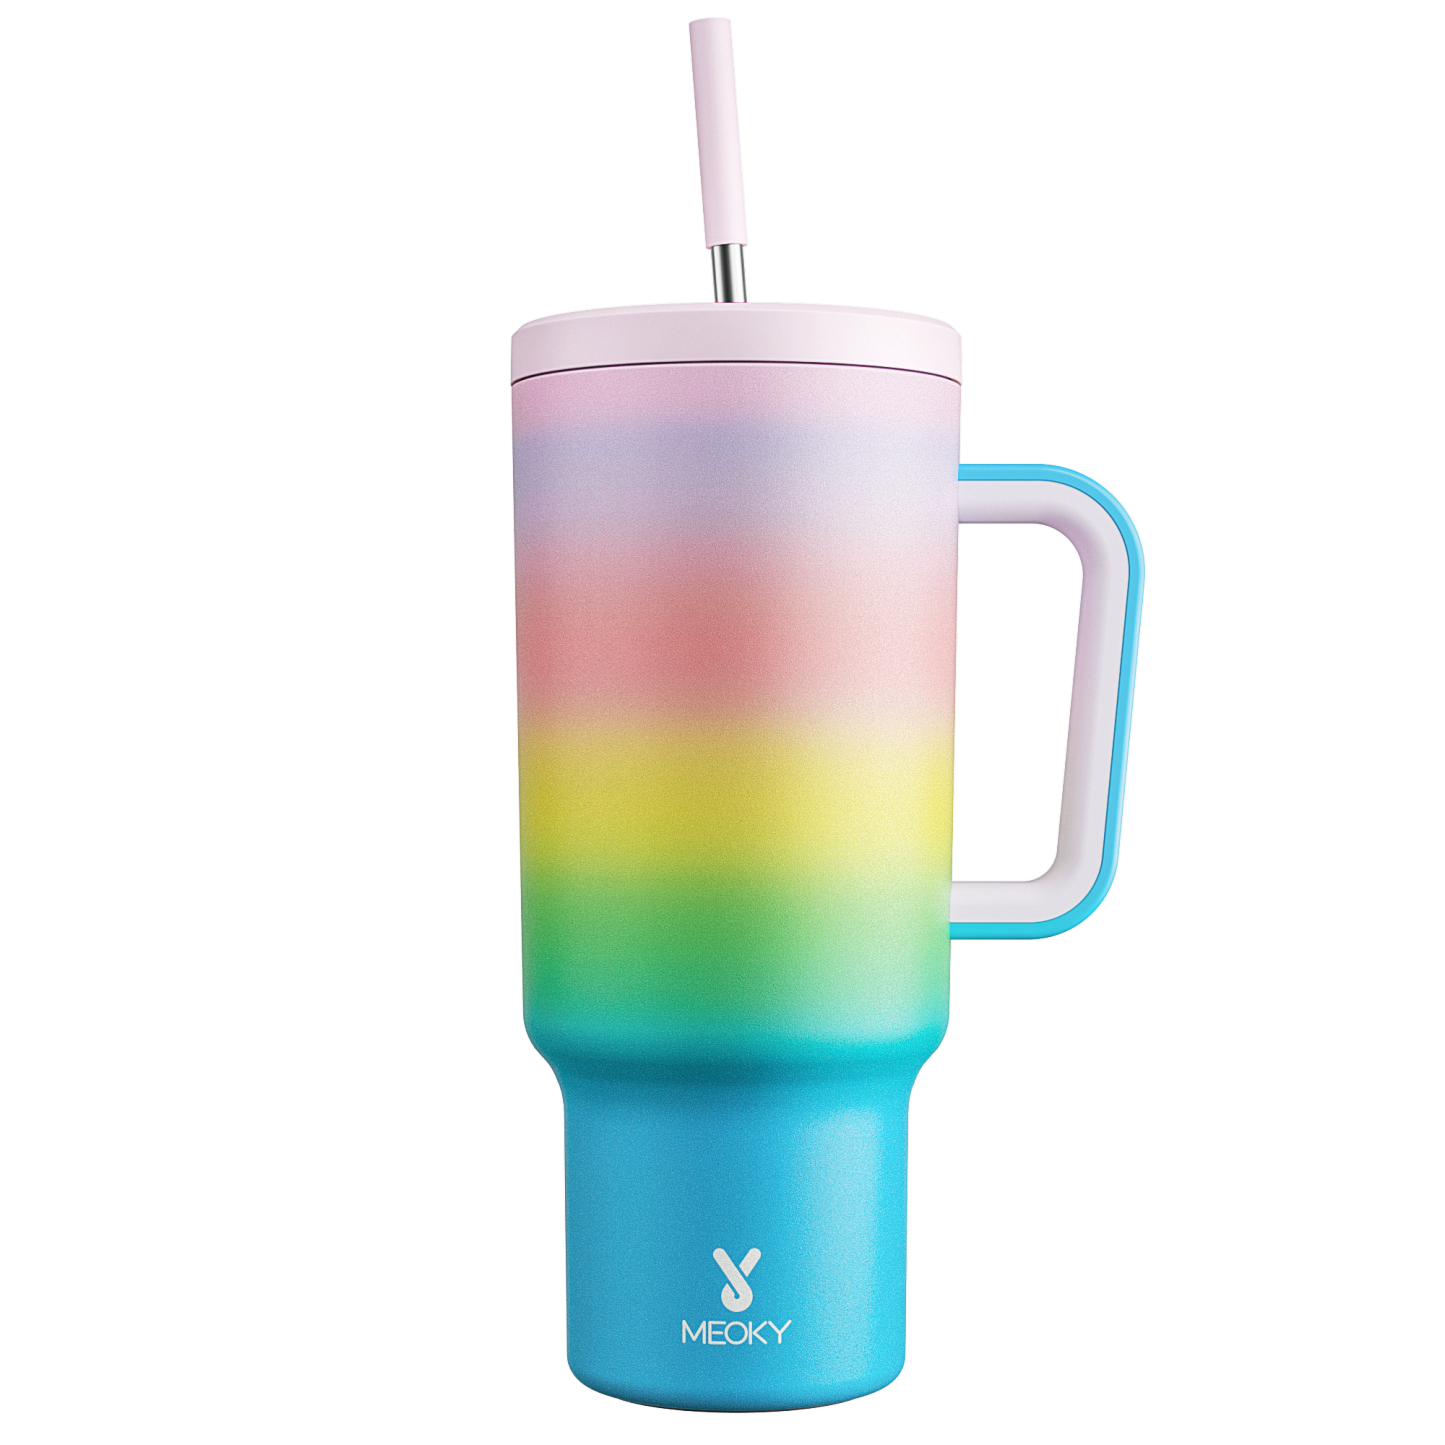 Meoky 40oz Tumbler with Handle and Straw Lid - Gradient